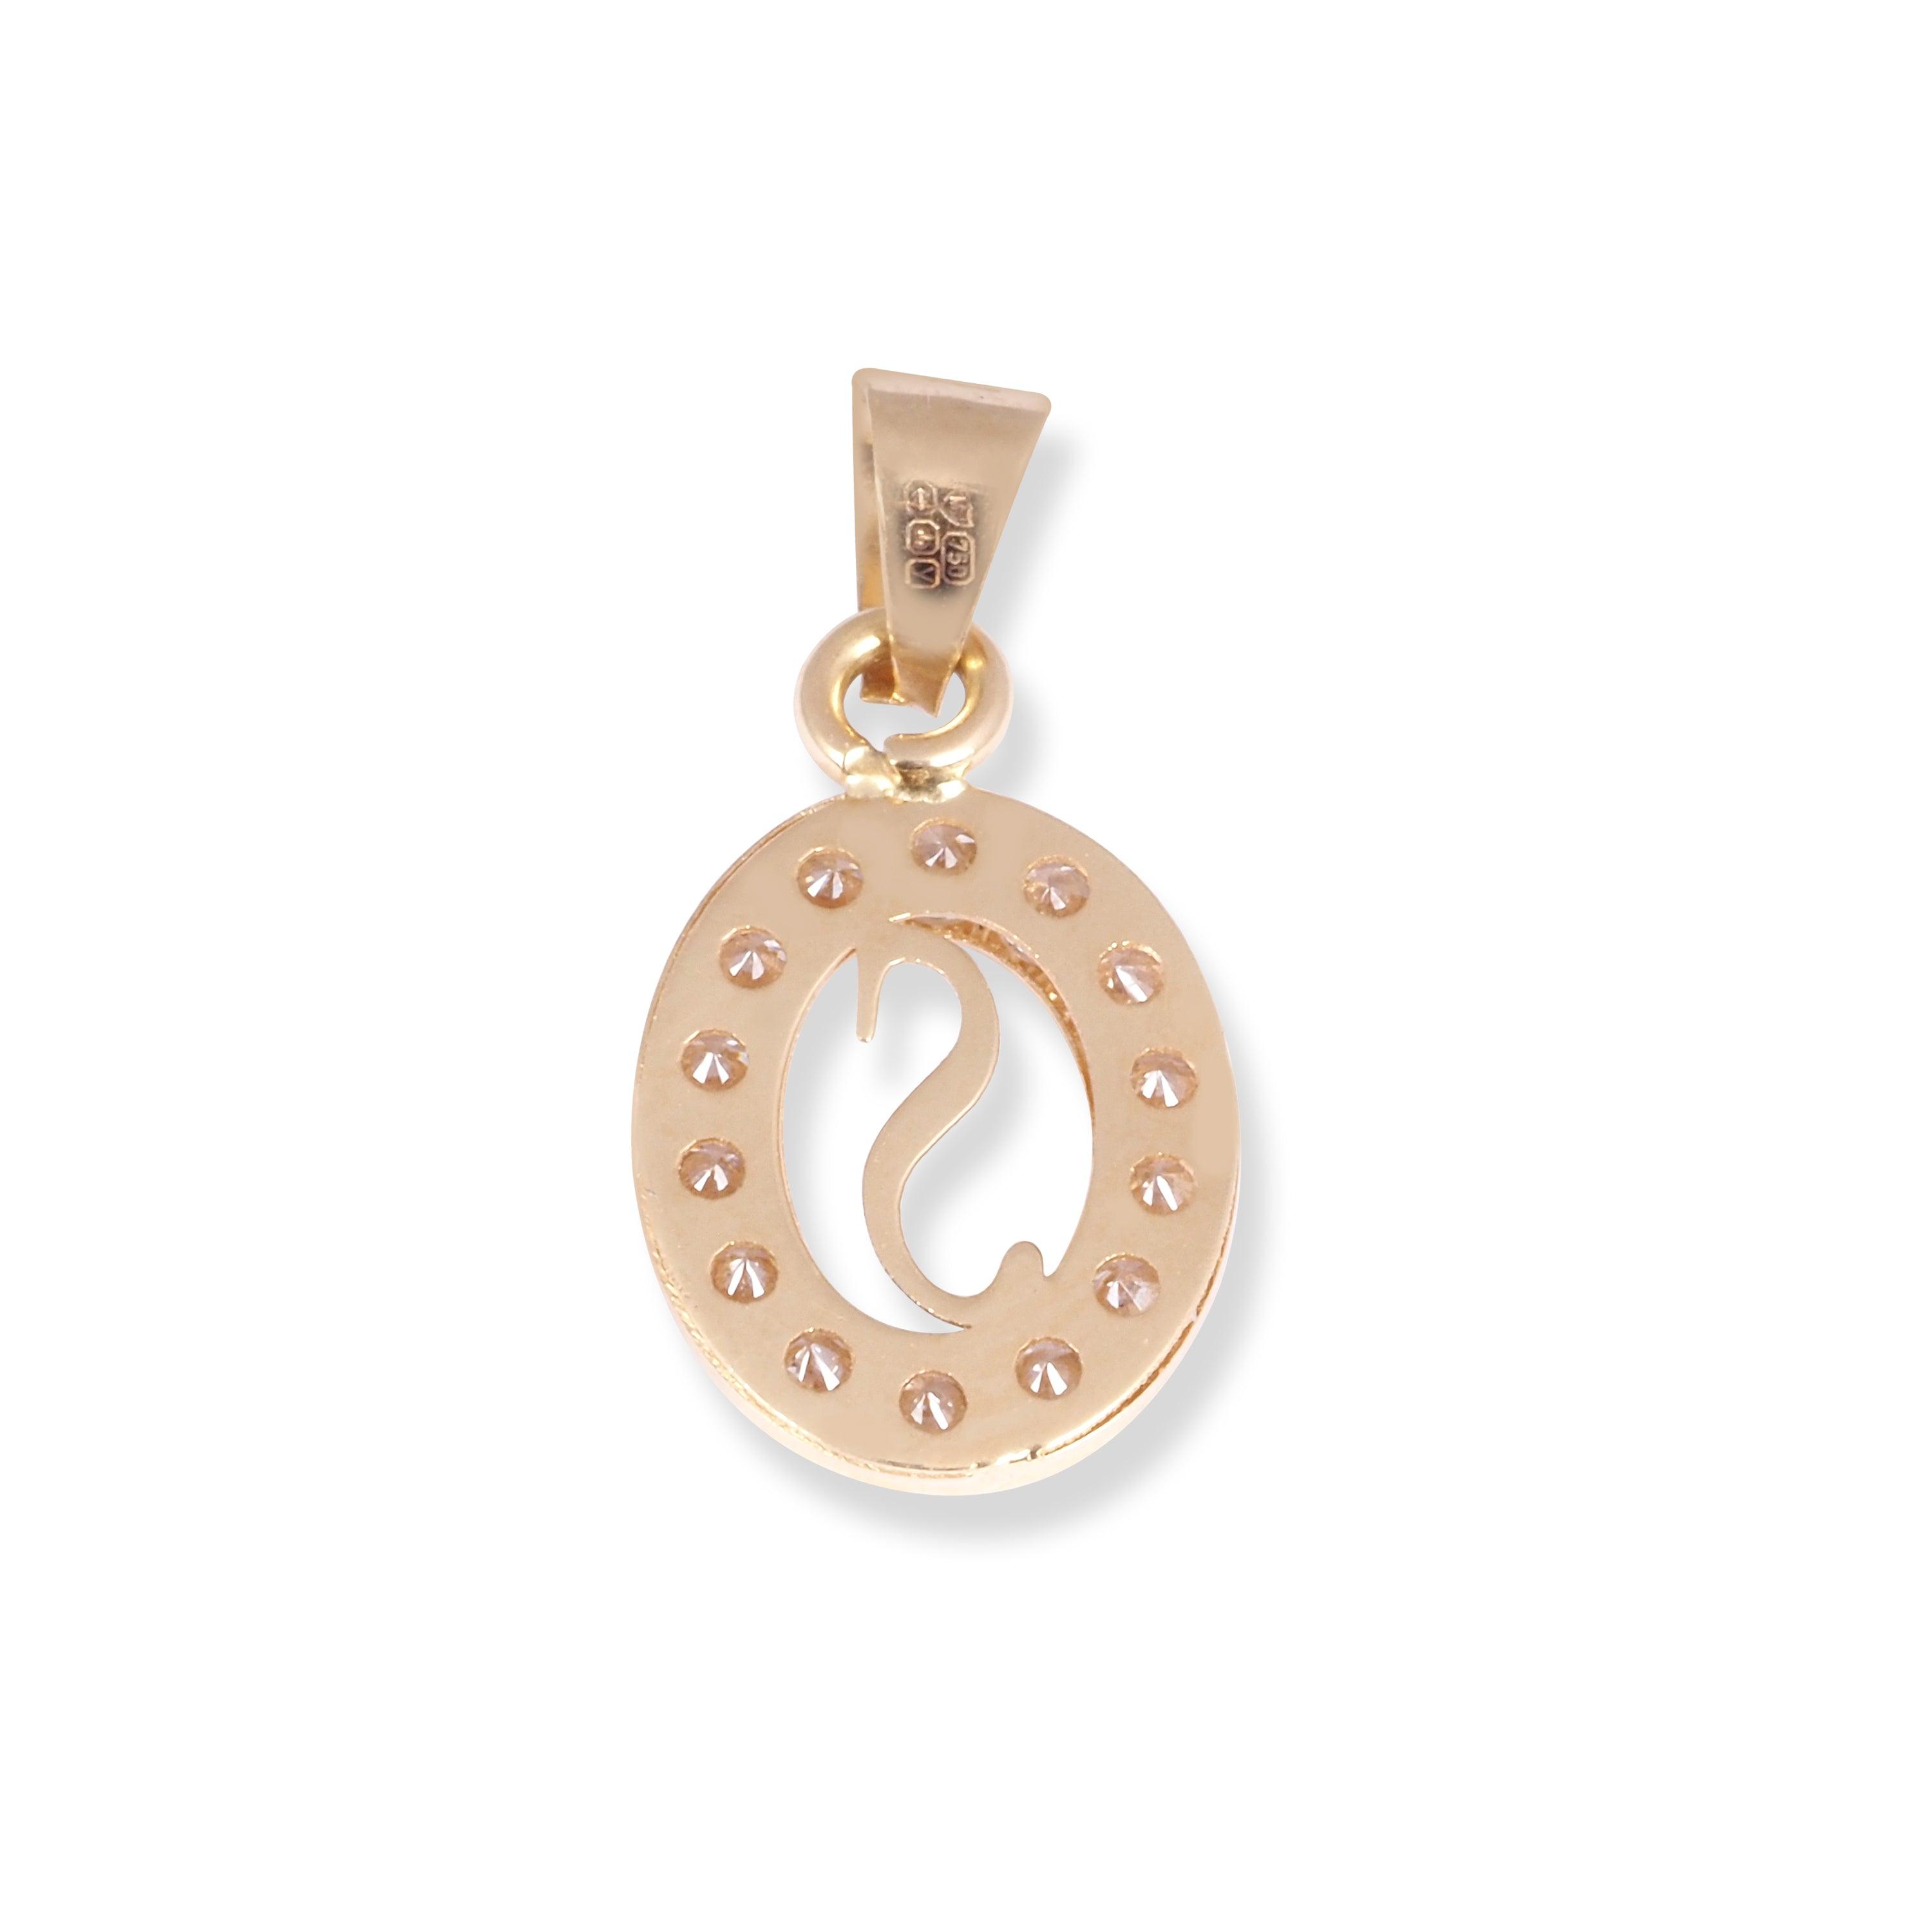 18ct Yellow Gold Dainty Initial 'S' Pendant with Cubic Zirconia Stones P-7966-S - Minar Jewellers